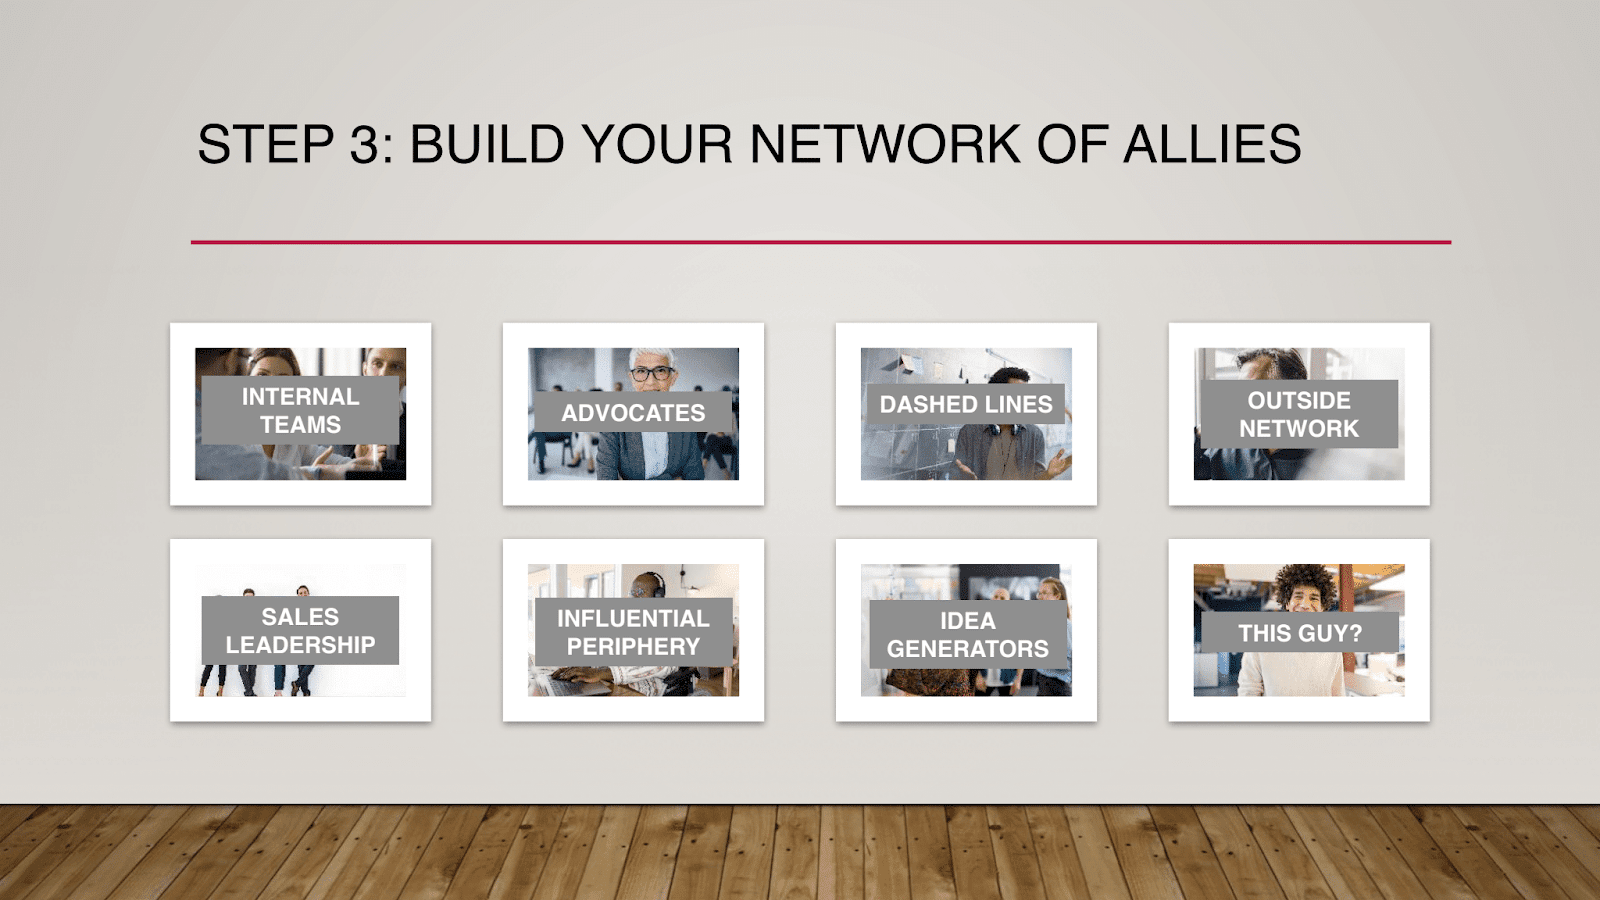 Step three: Build a network of allies